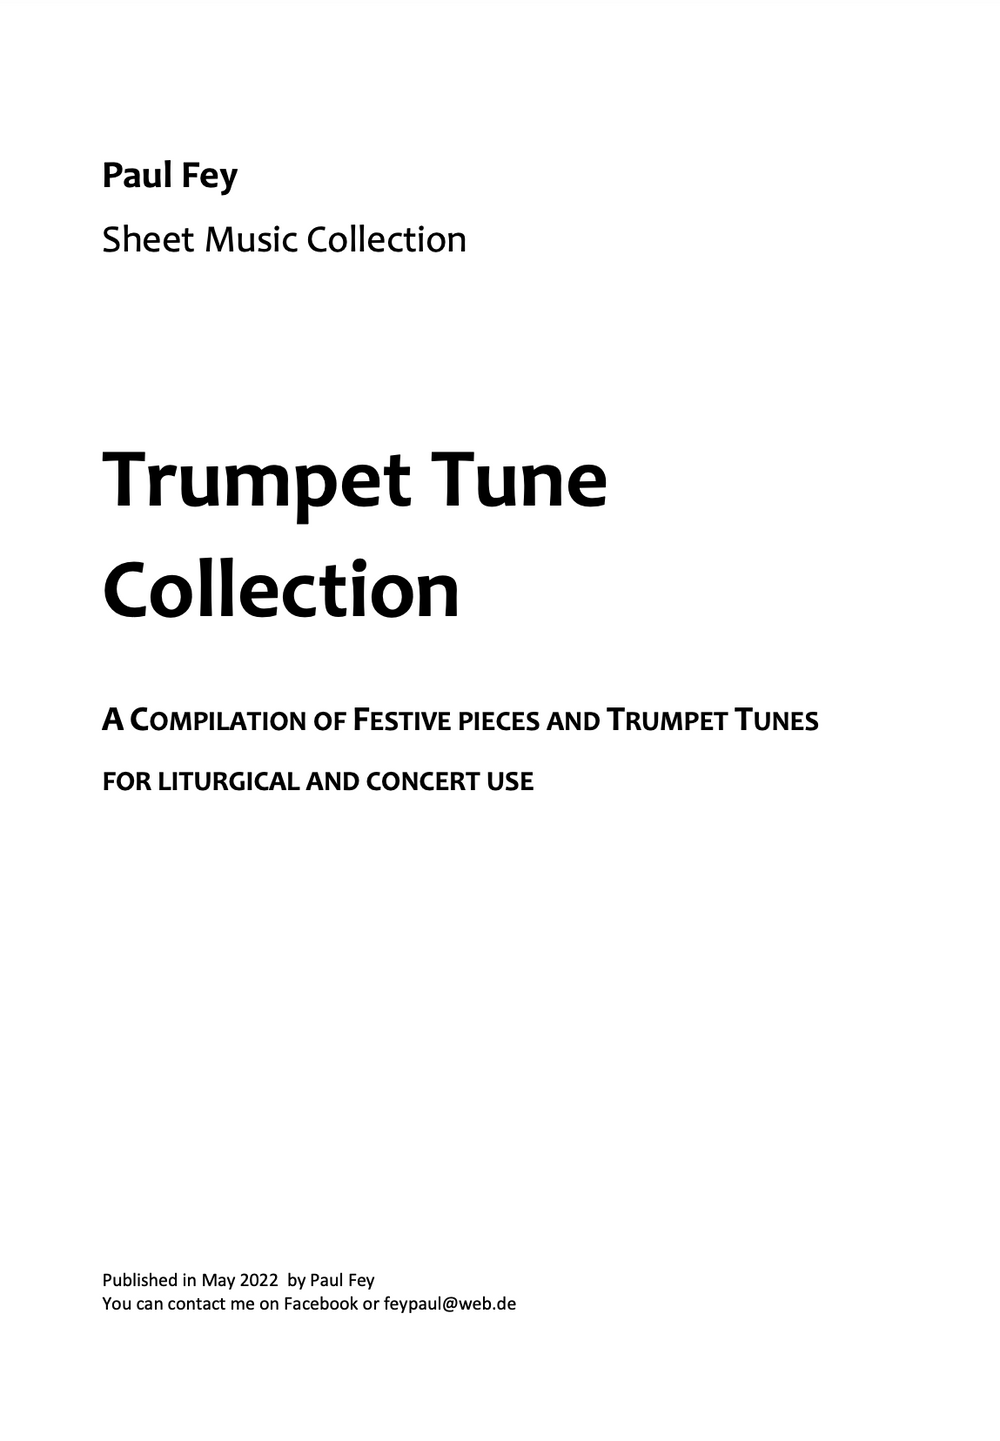 Trumpet Tune Collection (Sheet Music) - Music for Pipe Organ by Paul Fey